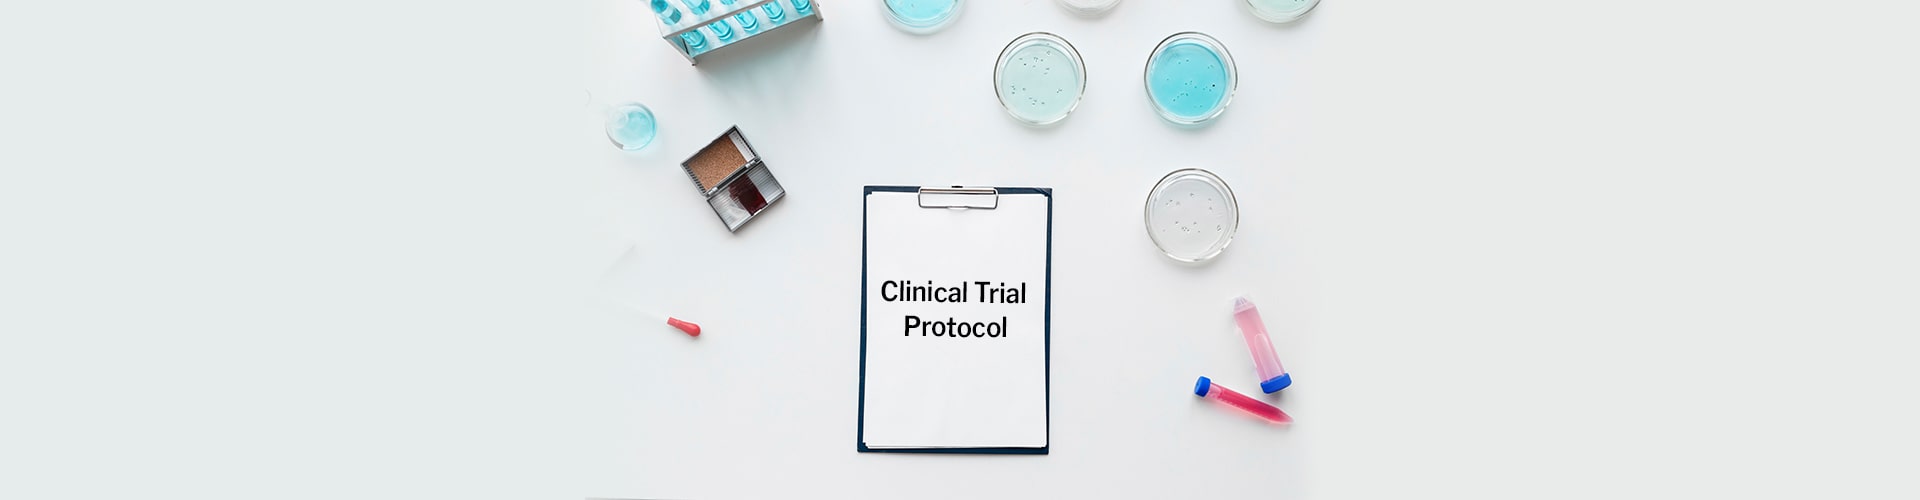 clinical trial protocol